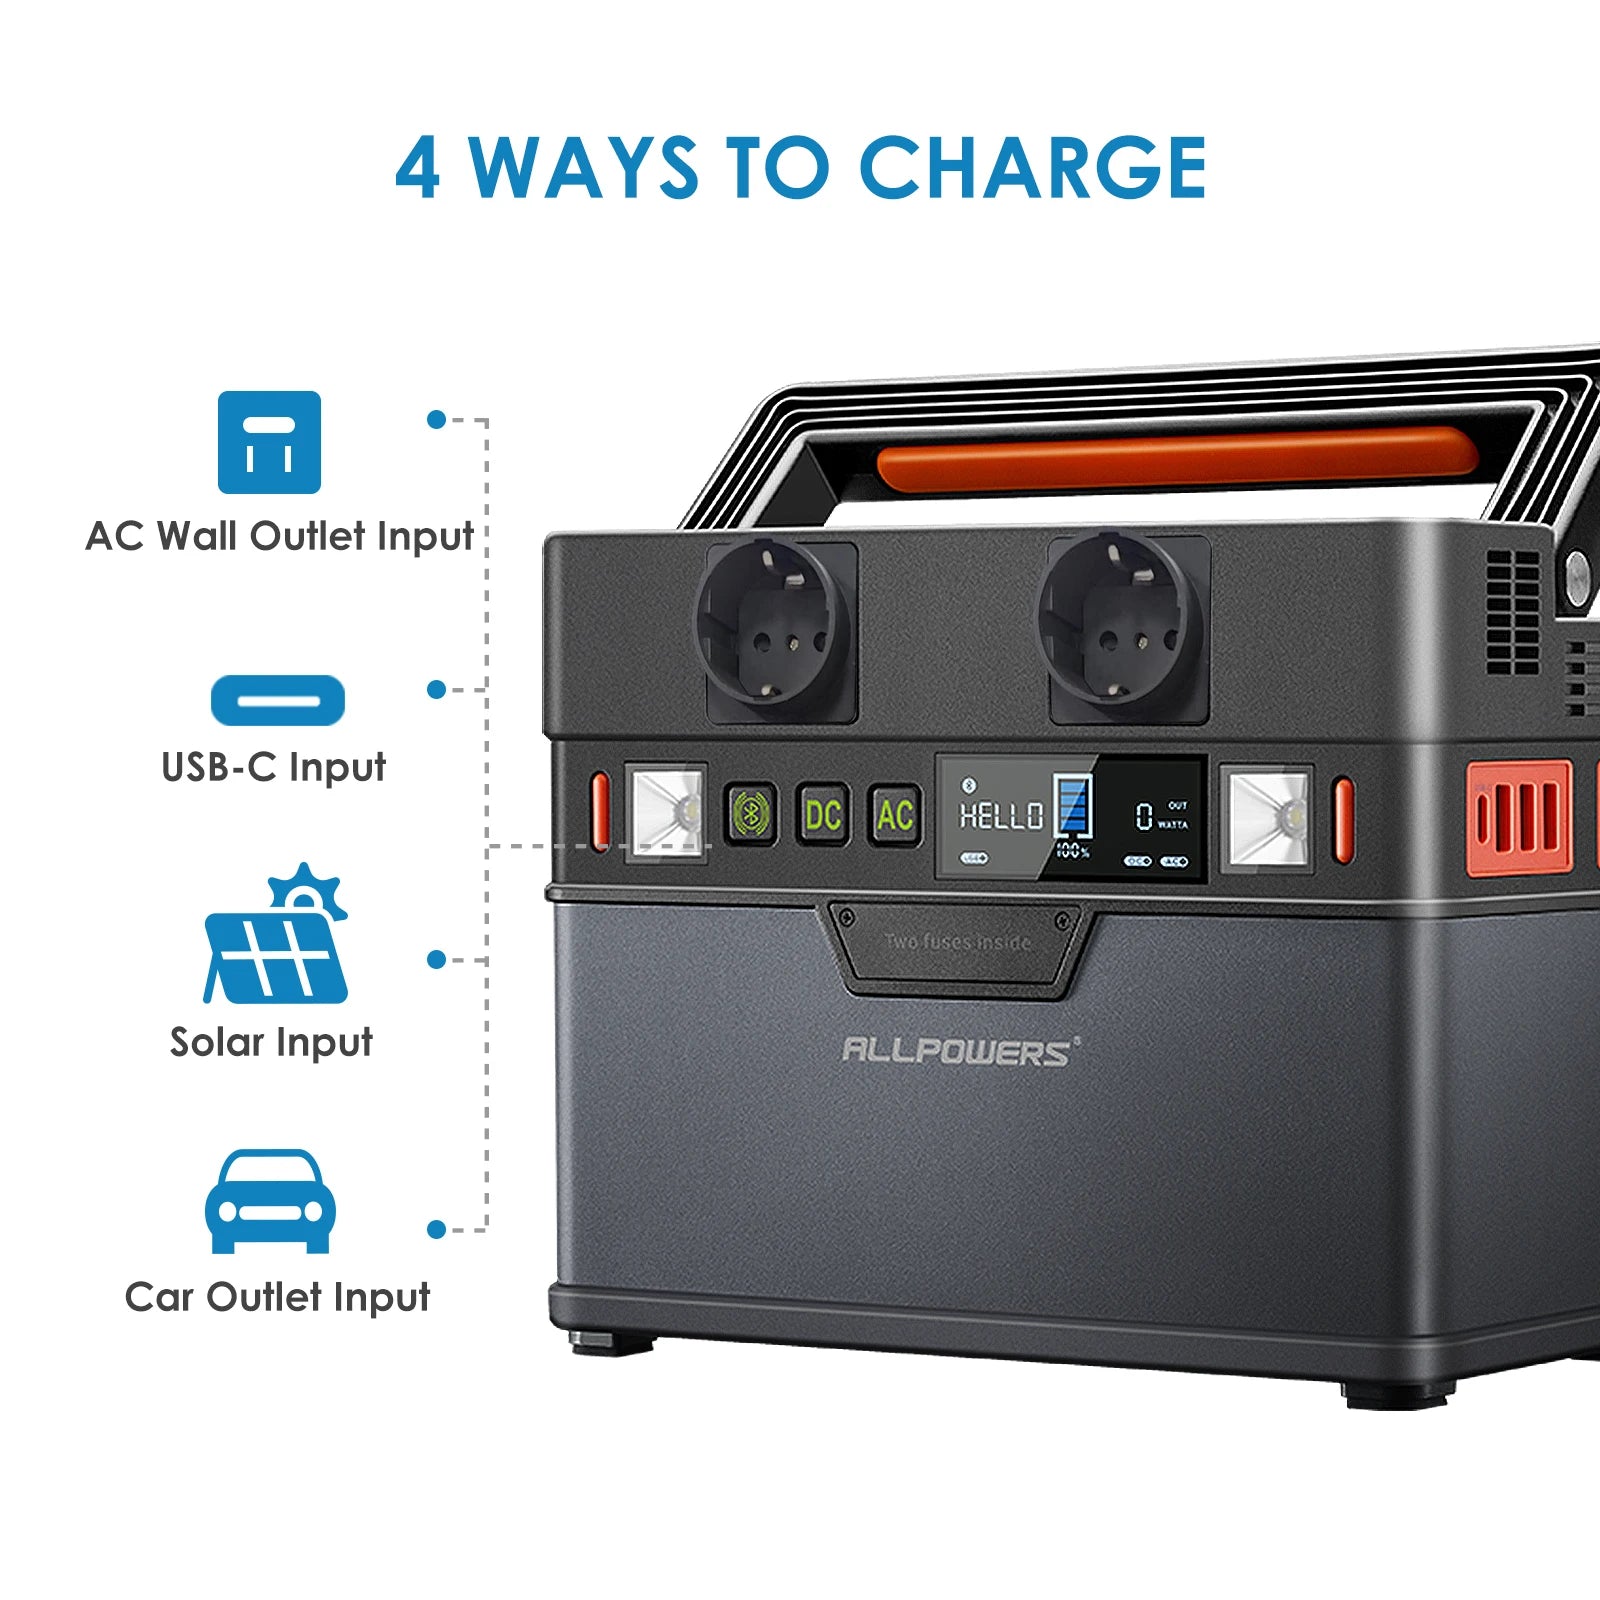 ALLPOWERS Portable Power Station 288Wh / 78000mAh Mobile Power Supply - IHavePaws